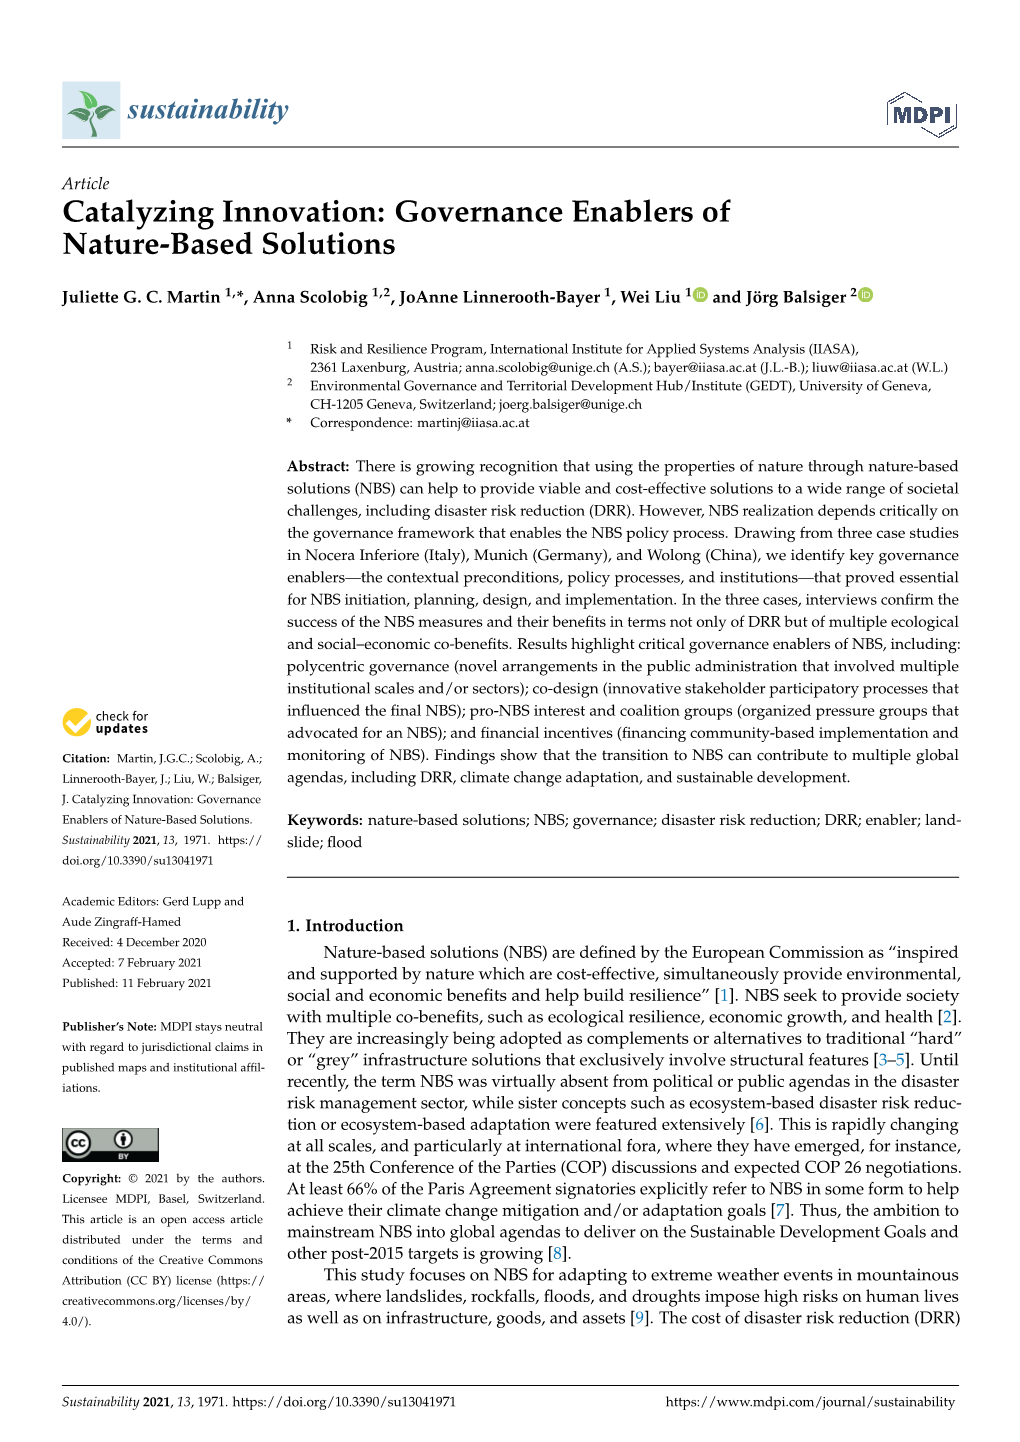 Catalyzing Innovation: Governance Enablers of Nature-Based Solutions